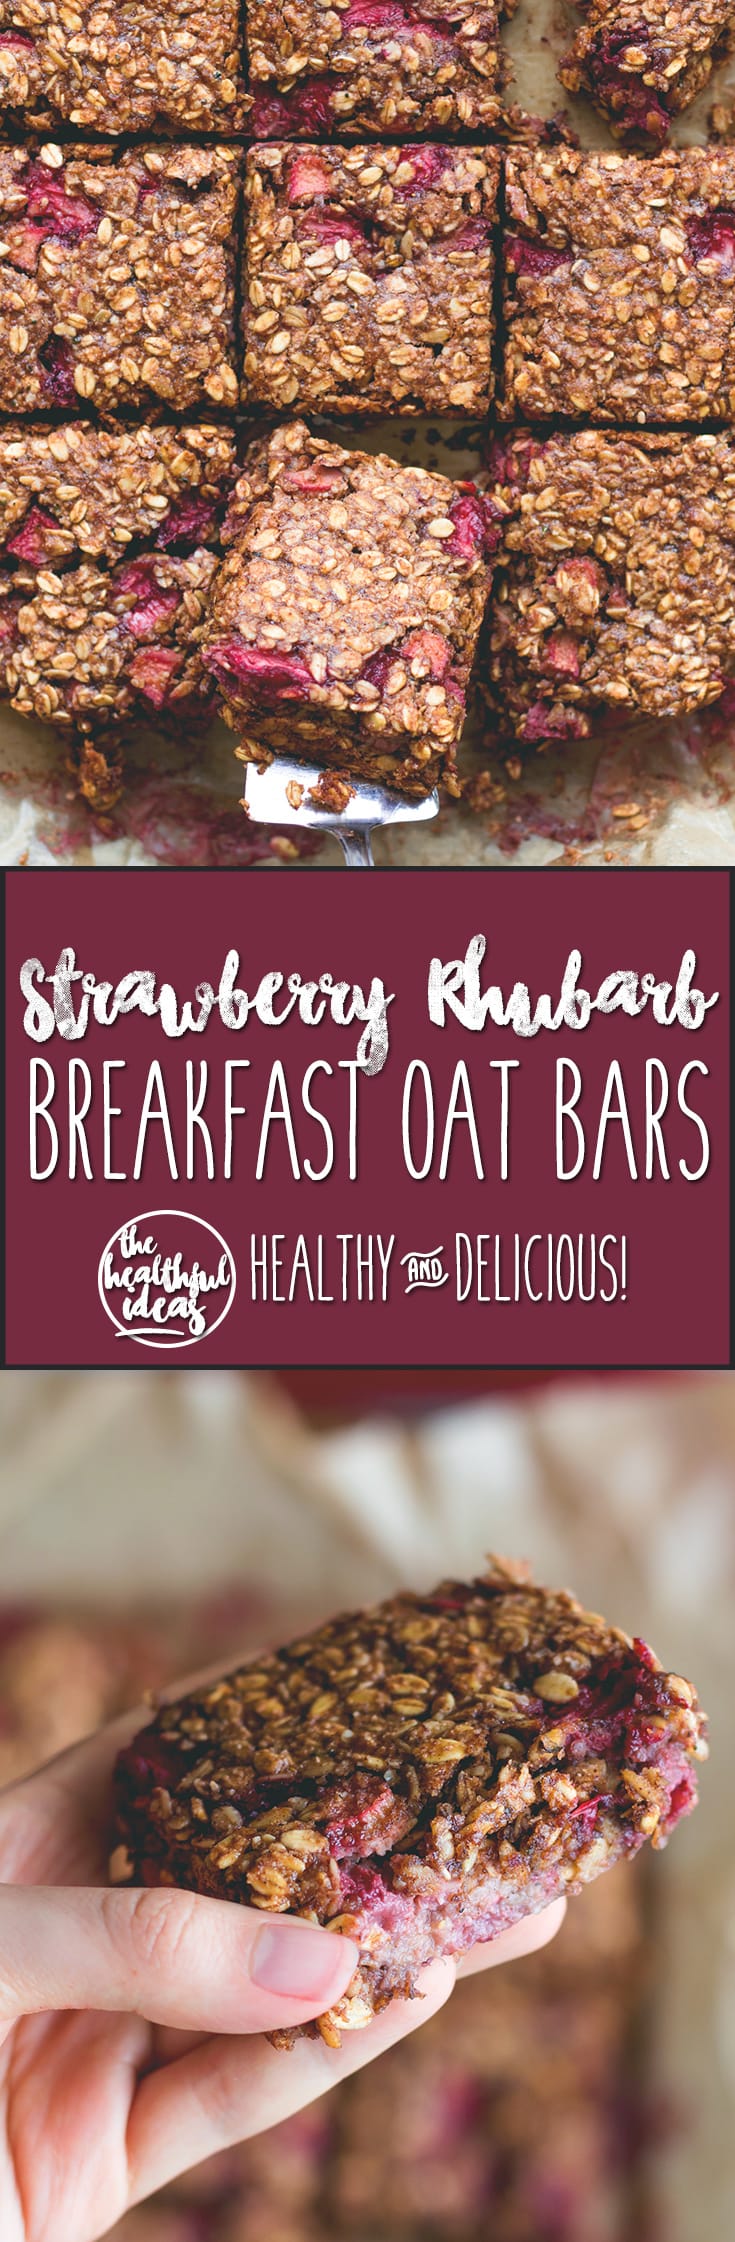 Strawberry Rhubarb Breakfast Oat Bars - delicious breakfast bars that taste totally like a dessert. You'll love this recipe. The rhubarb strawberry combination with maple syrup is divine! It tastes like marzipan! | thehealthfulideas.com